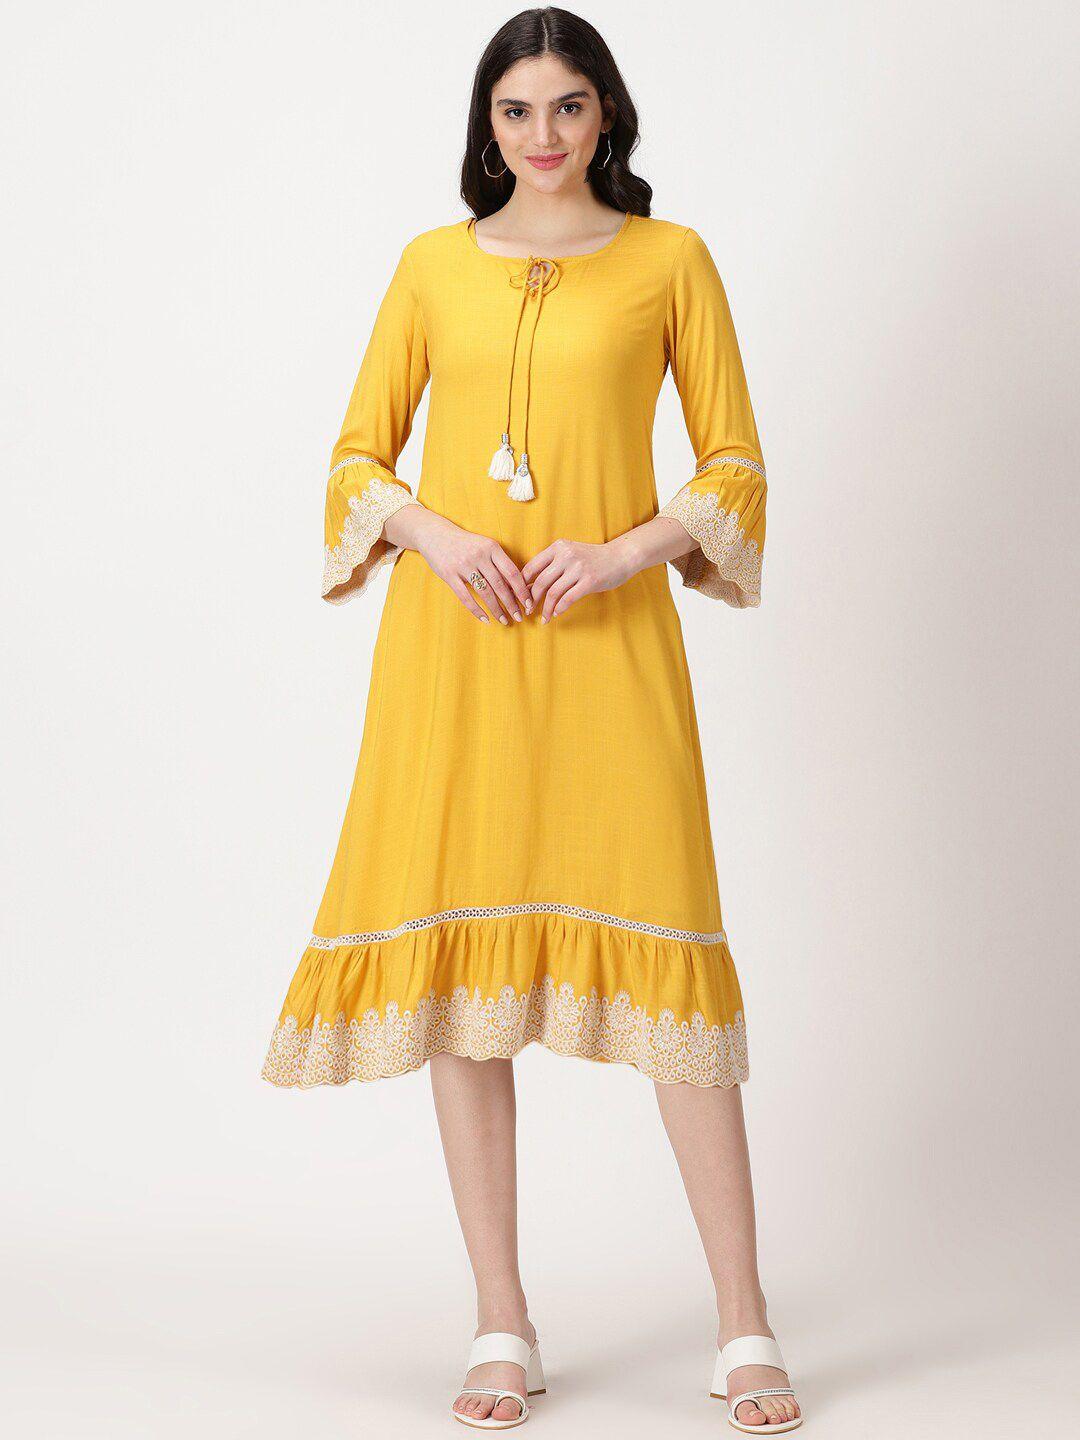 saffron threads tie-up neck a-line midi dress with lace insert & embroidered detail